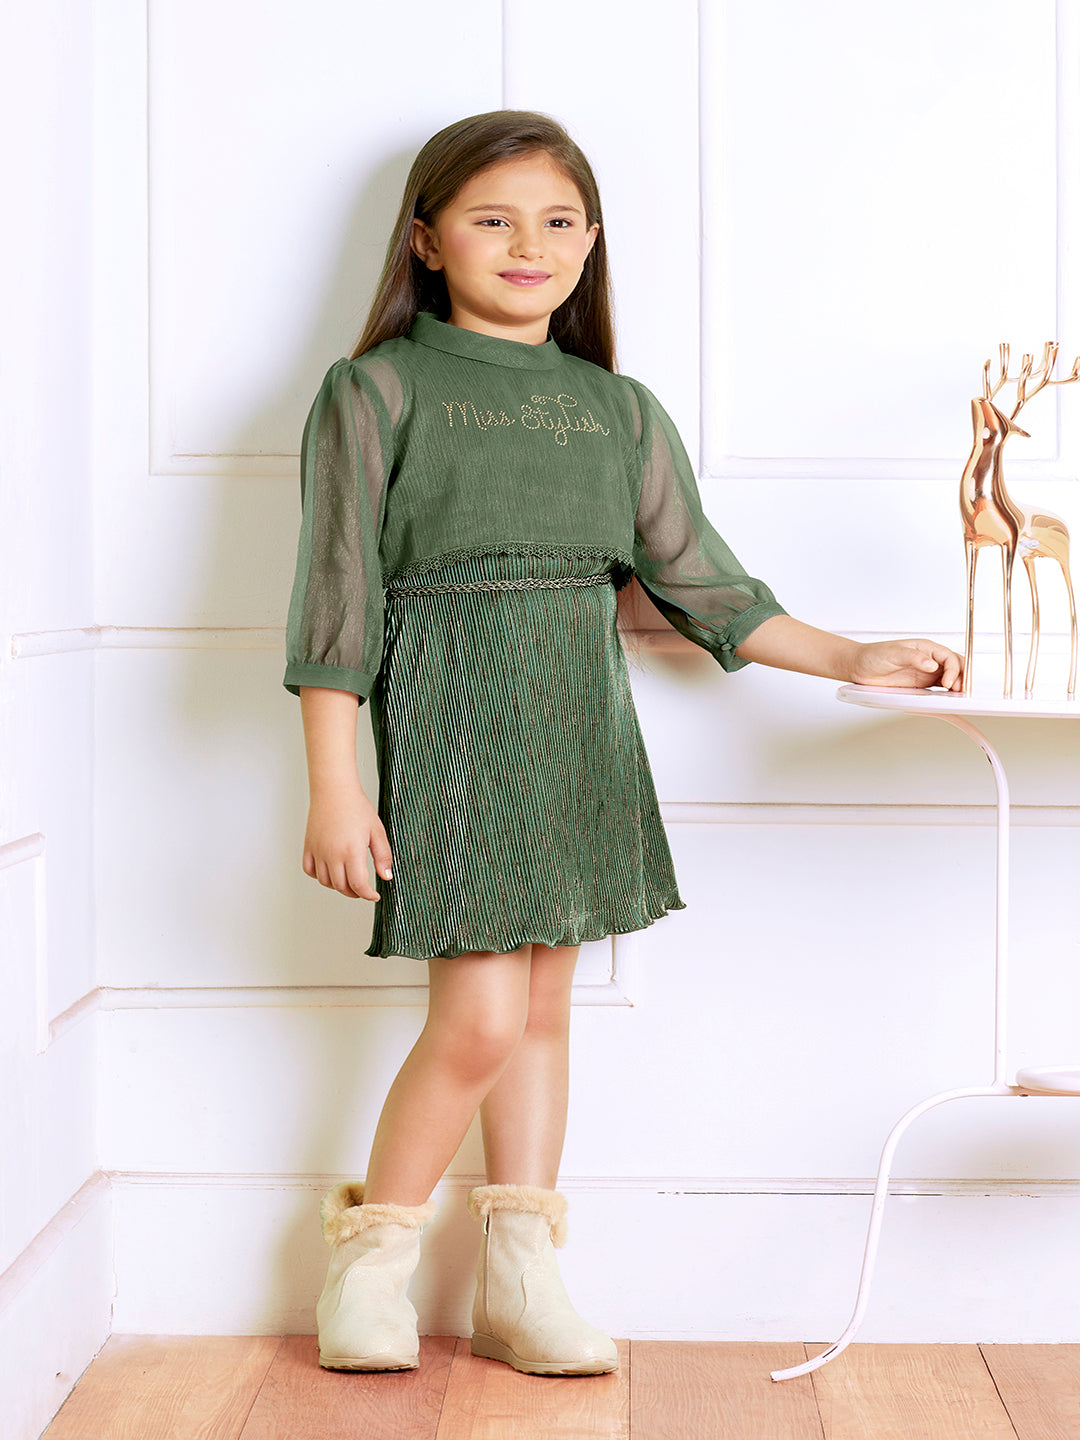 Tiny Baby Green Colored Dress - 2137 Green